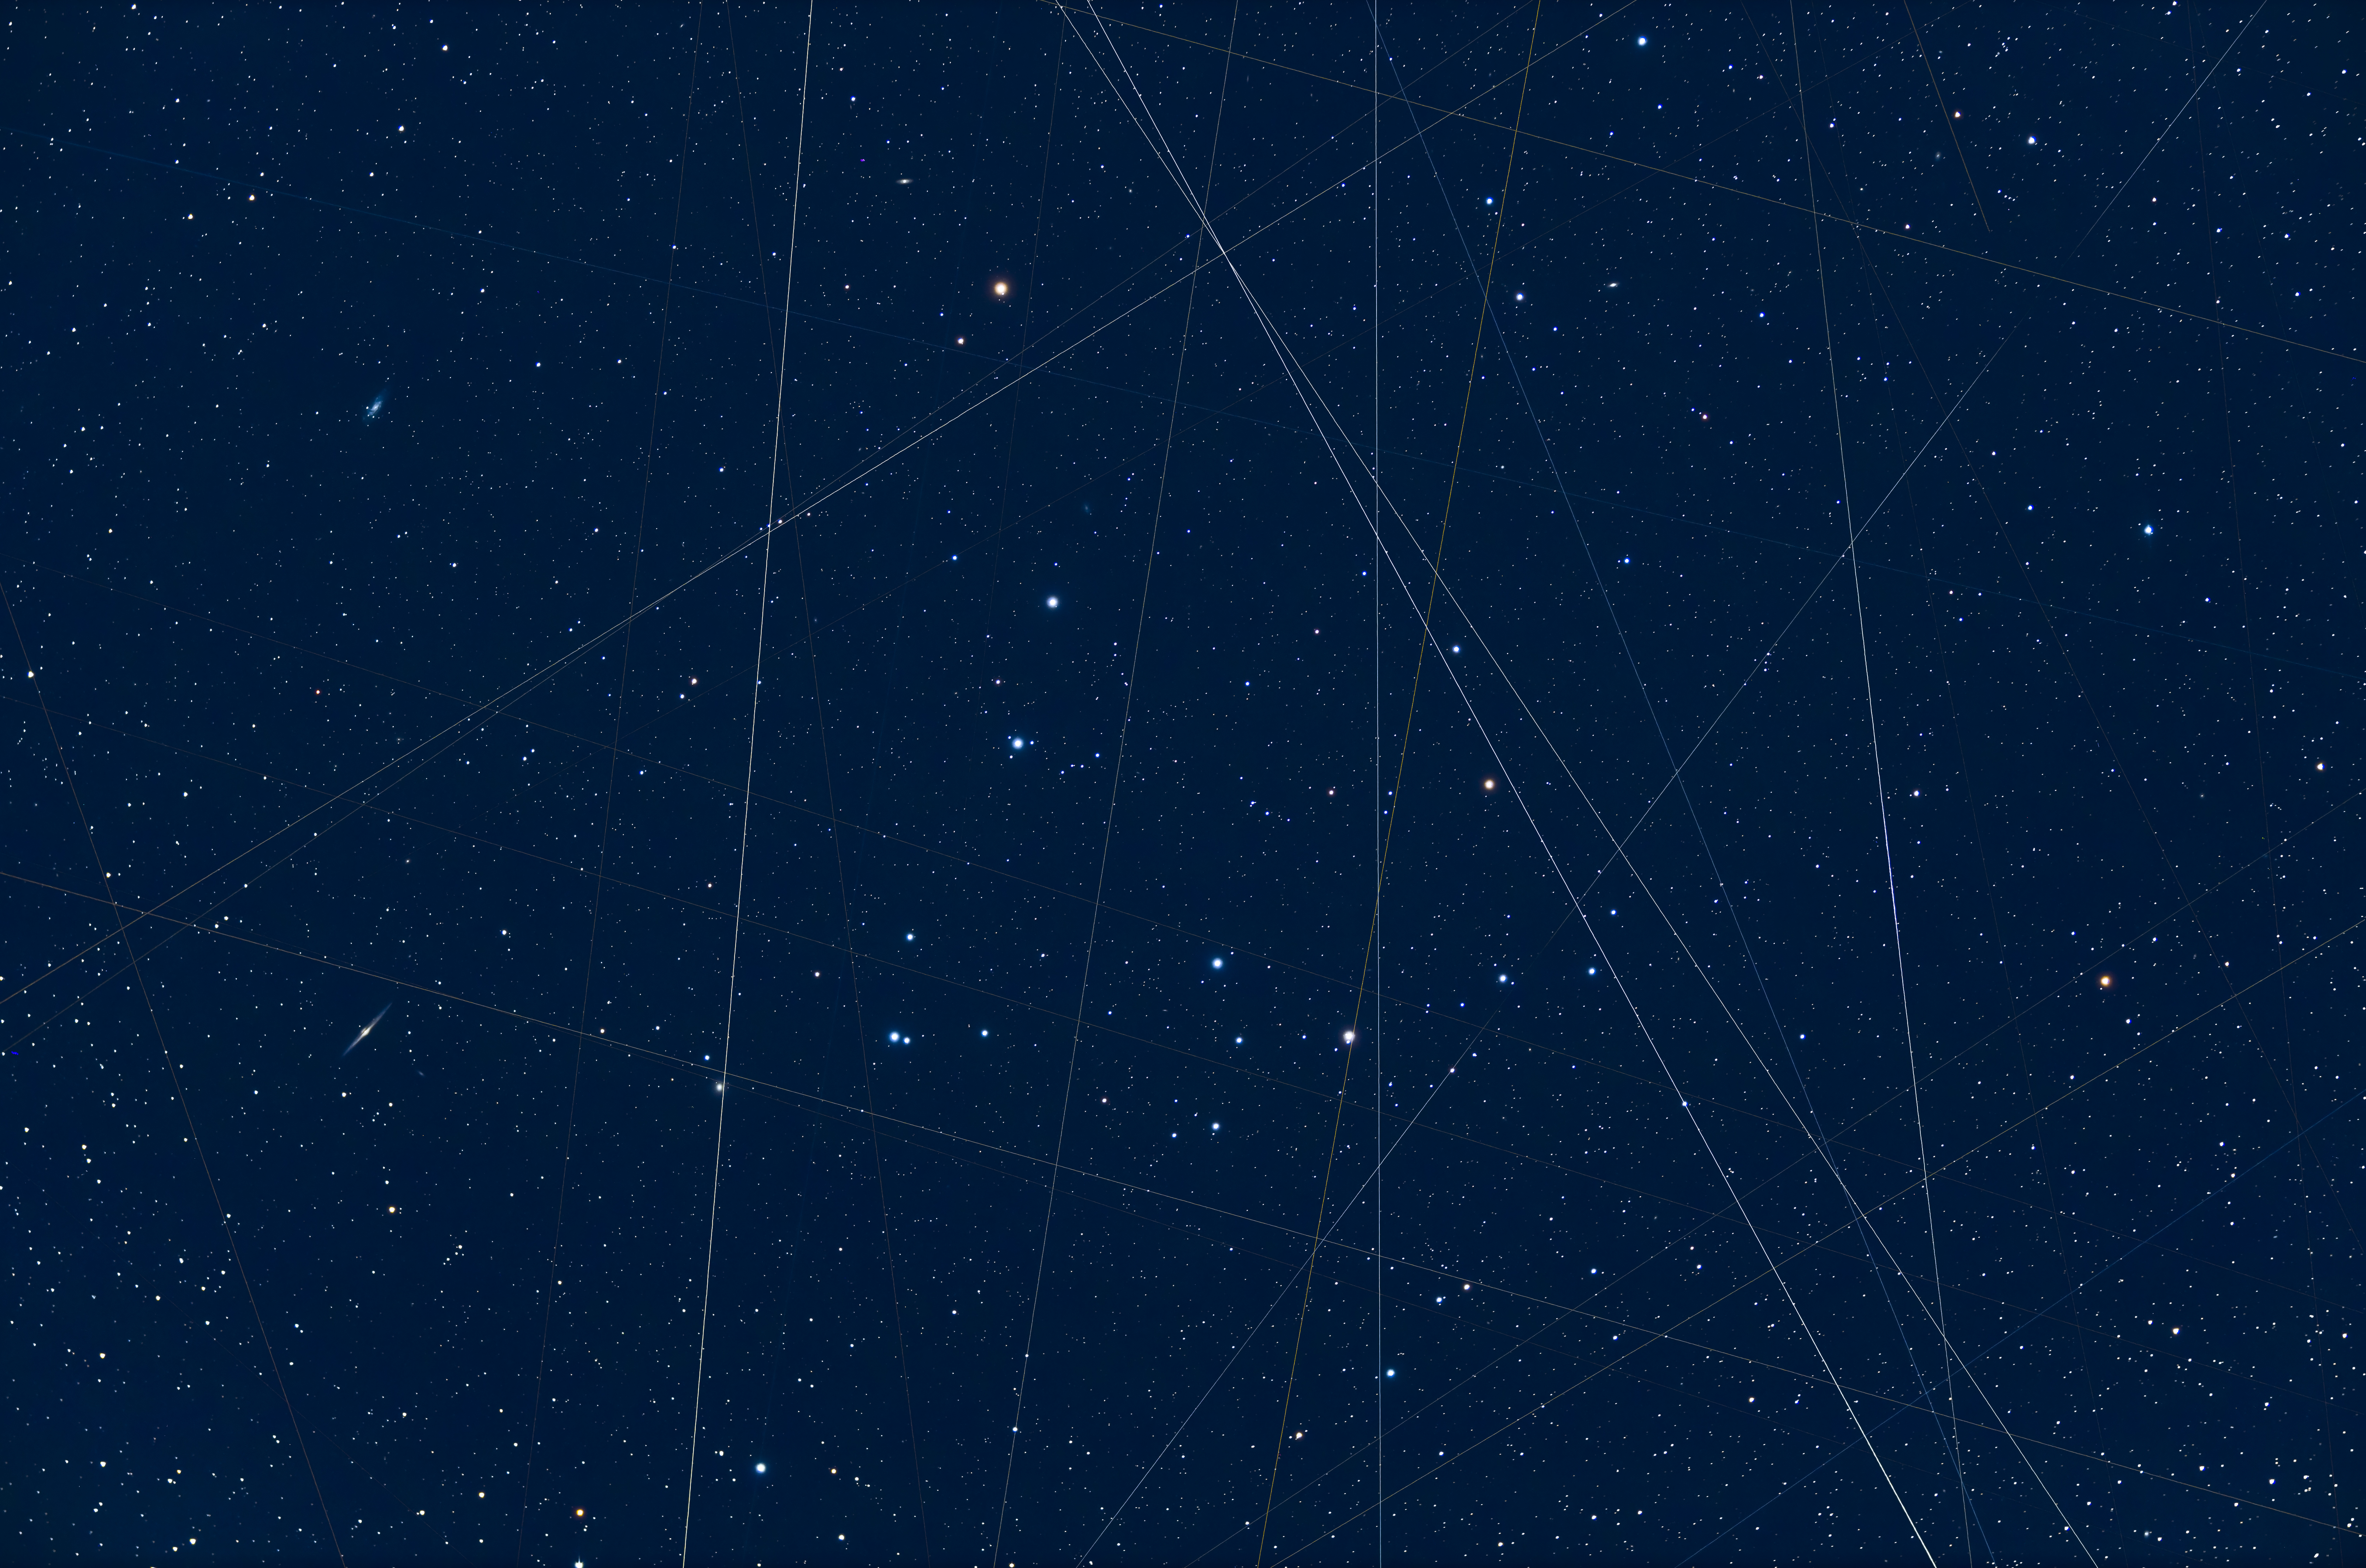 Satellites and light pollution: Multiple satellites streak through this composite of the Coma Berenices cluster, shot through a wide-field telescope over the course of about an hour. The trails mostly run north-south, so the photographer posits they are due to polar-orbiting satellites, rather than the largely west-east tracks of Starlink.